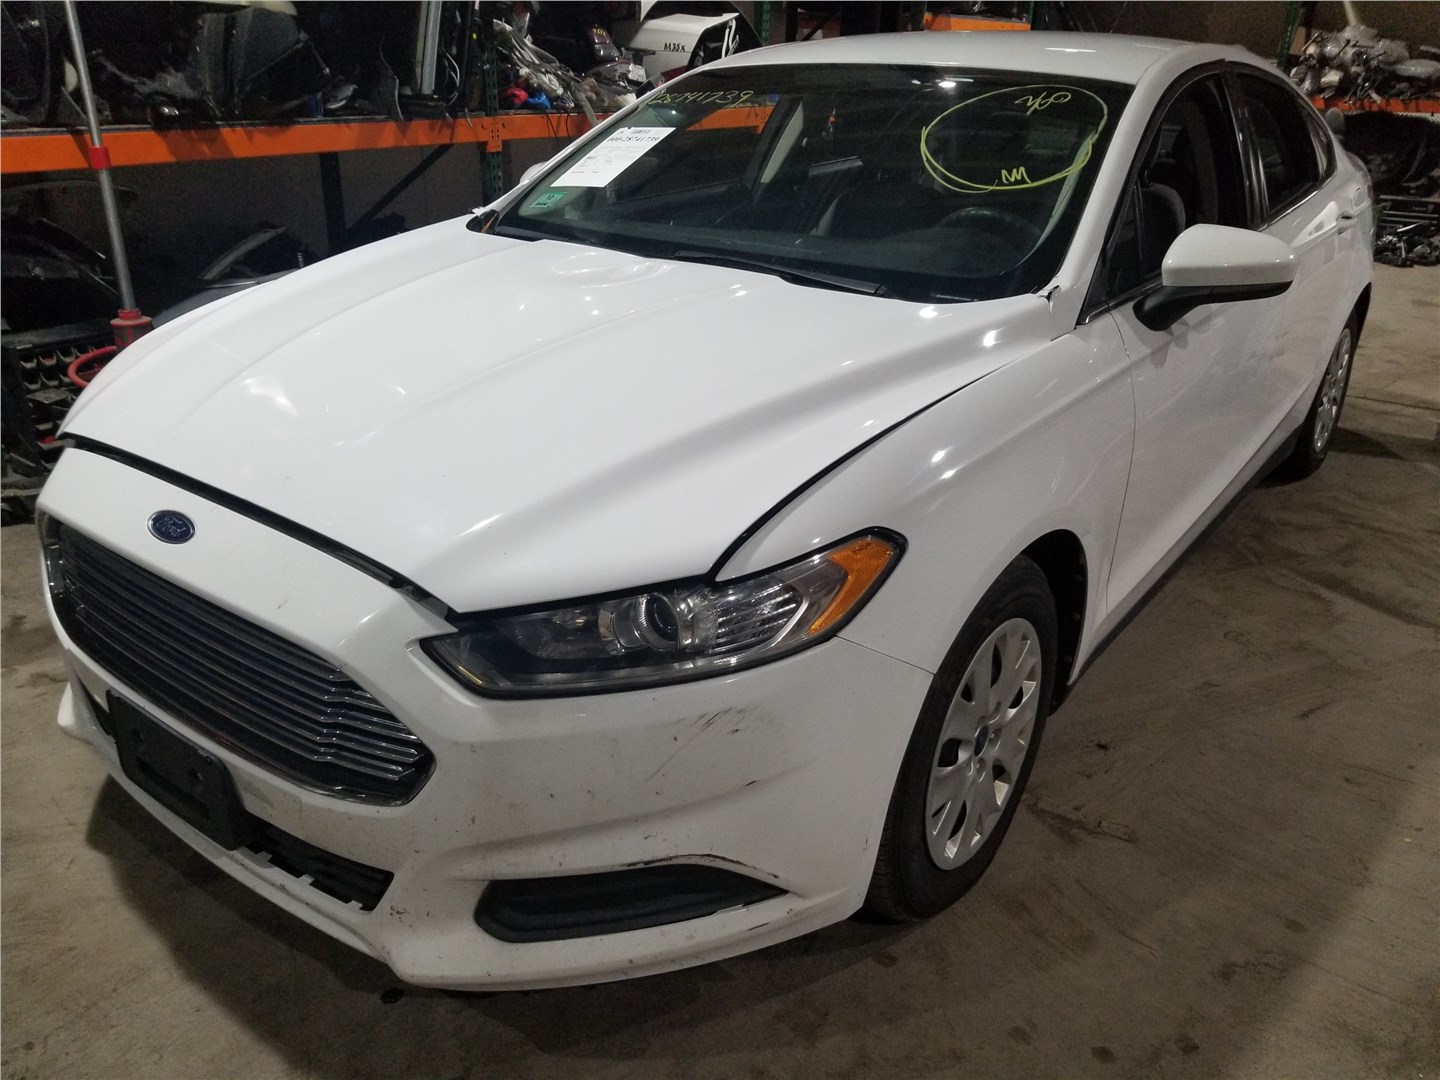 DS7Z17527A Стекло форточки двери Ford Fusion 2012-2016 USA 2013